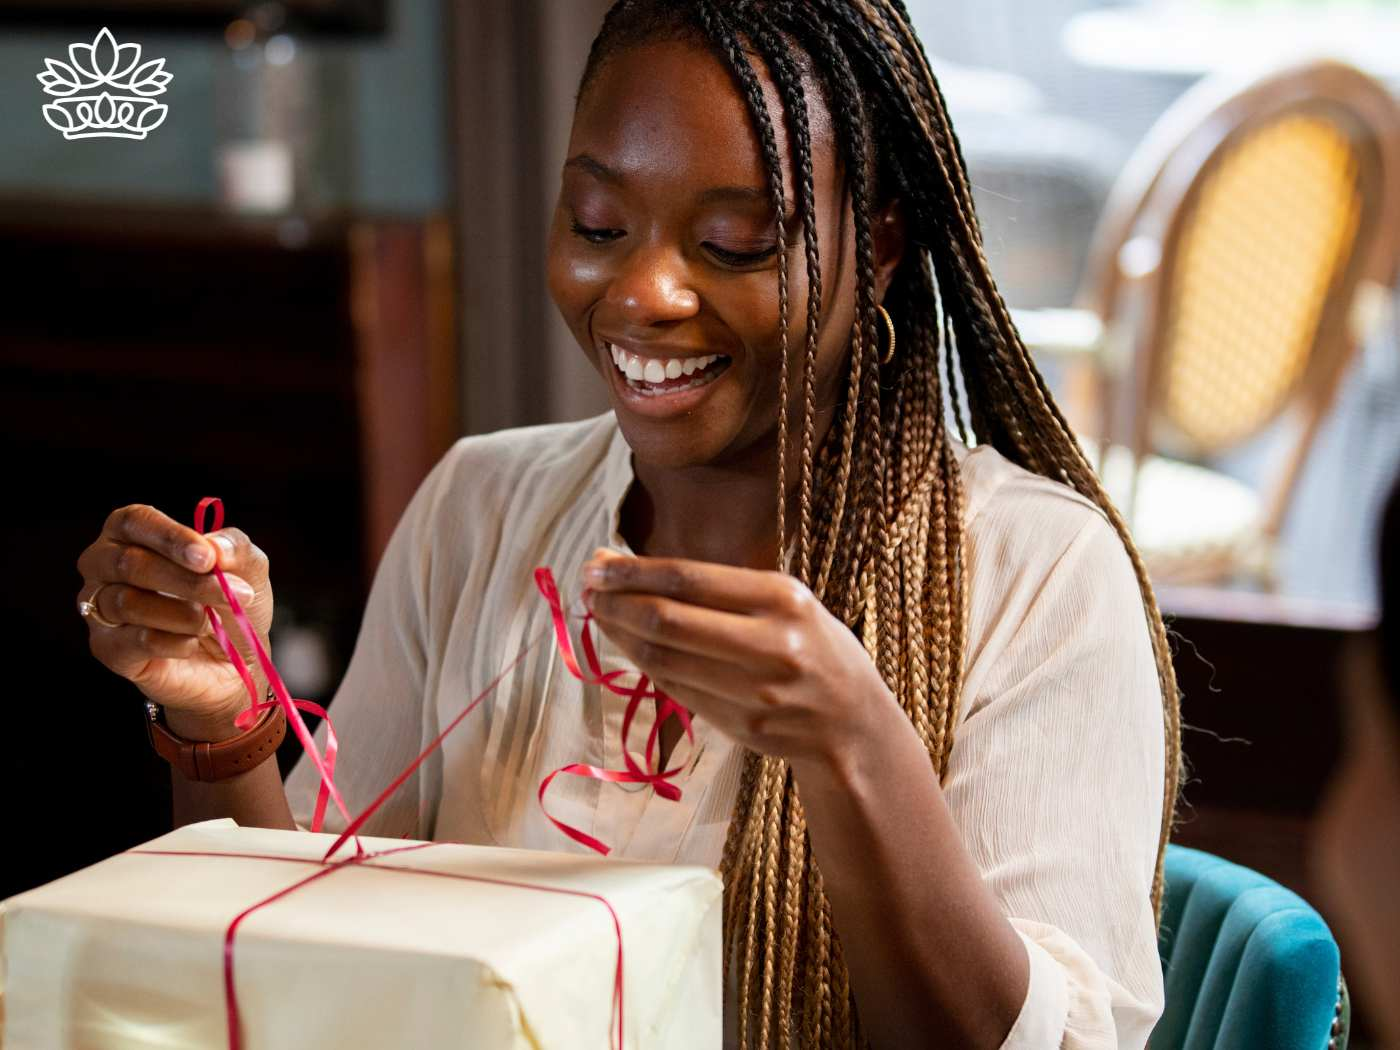 Happy woman with braided hair joyfully unwrapping a gift box, capturing a moment of excitement and surprise, from the Gift Boxes by Type Collection at Fabulous Flowers and Gifts